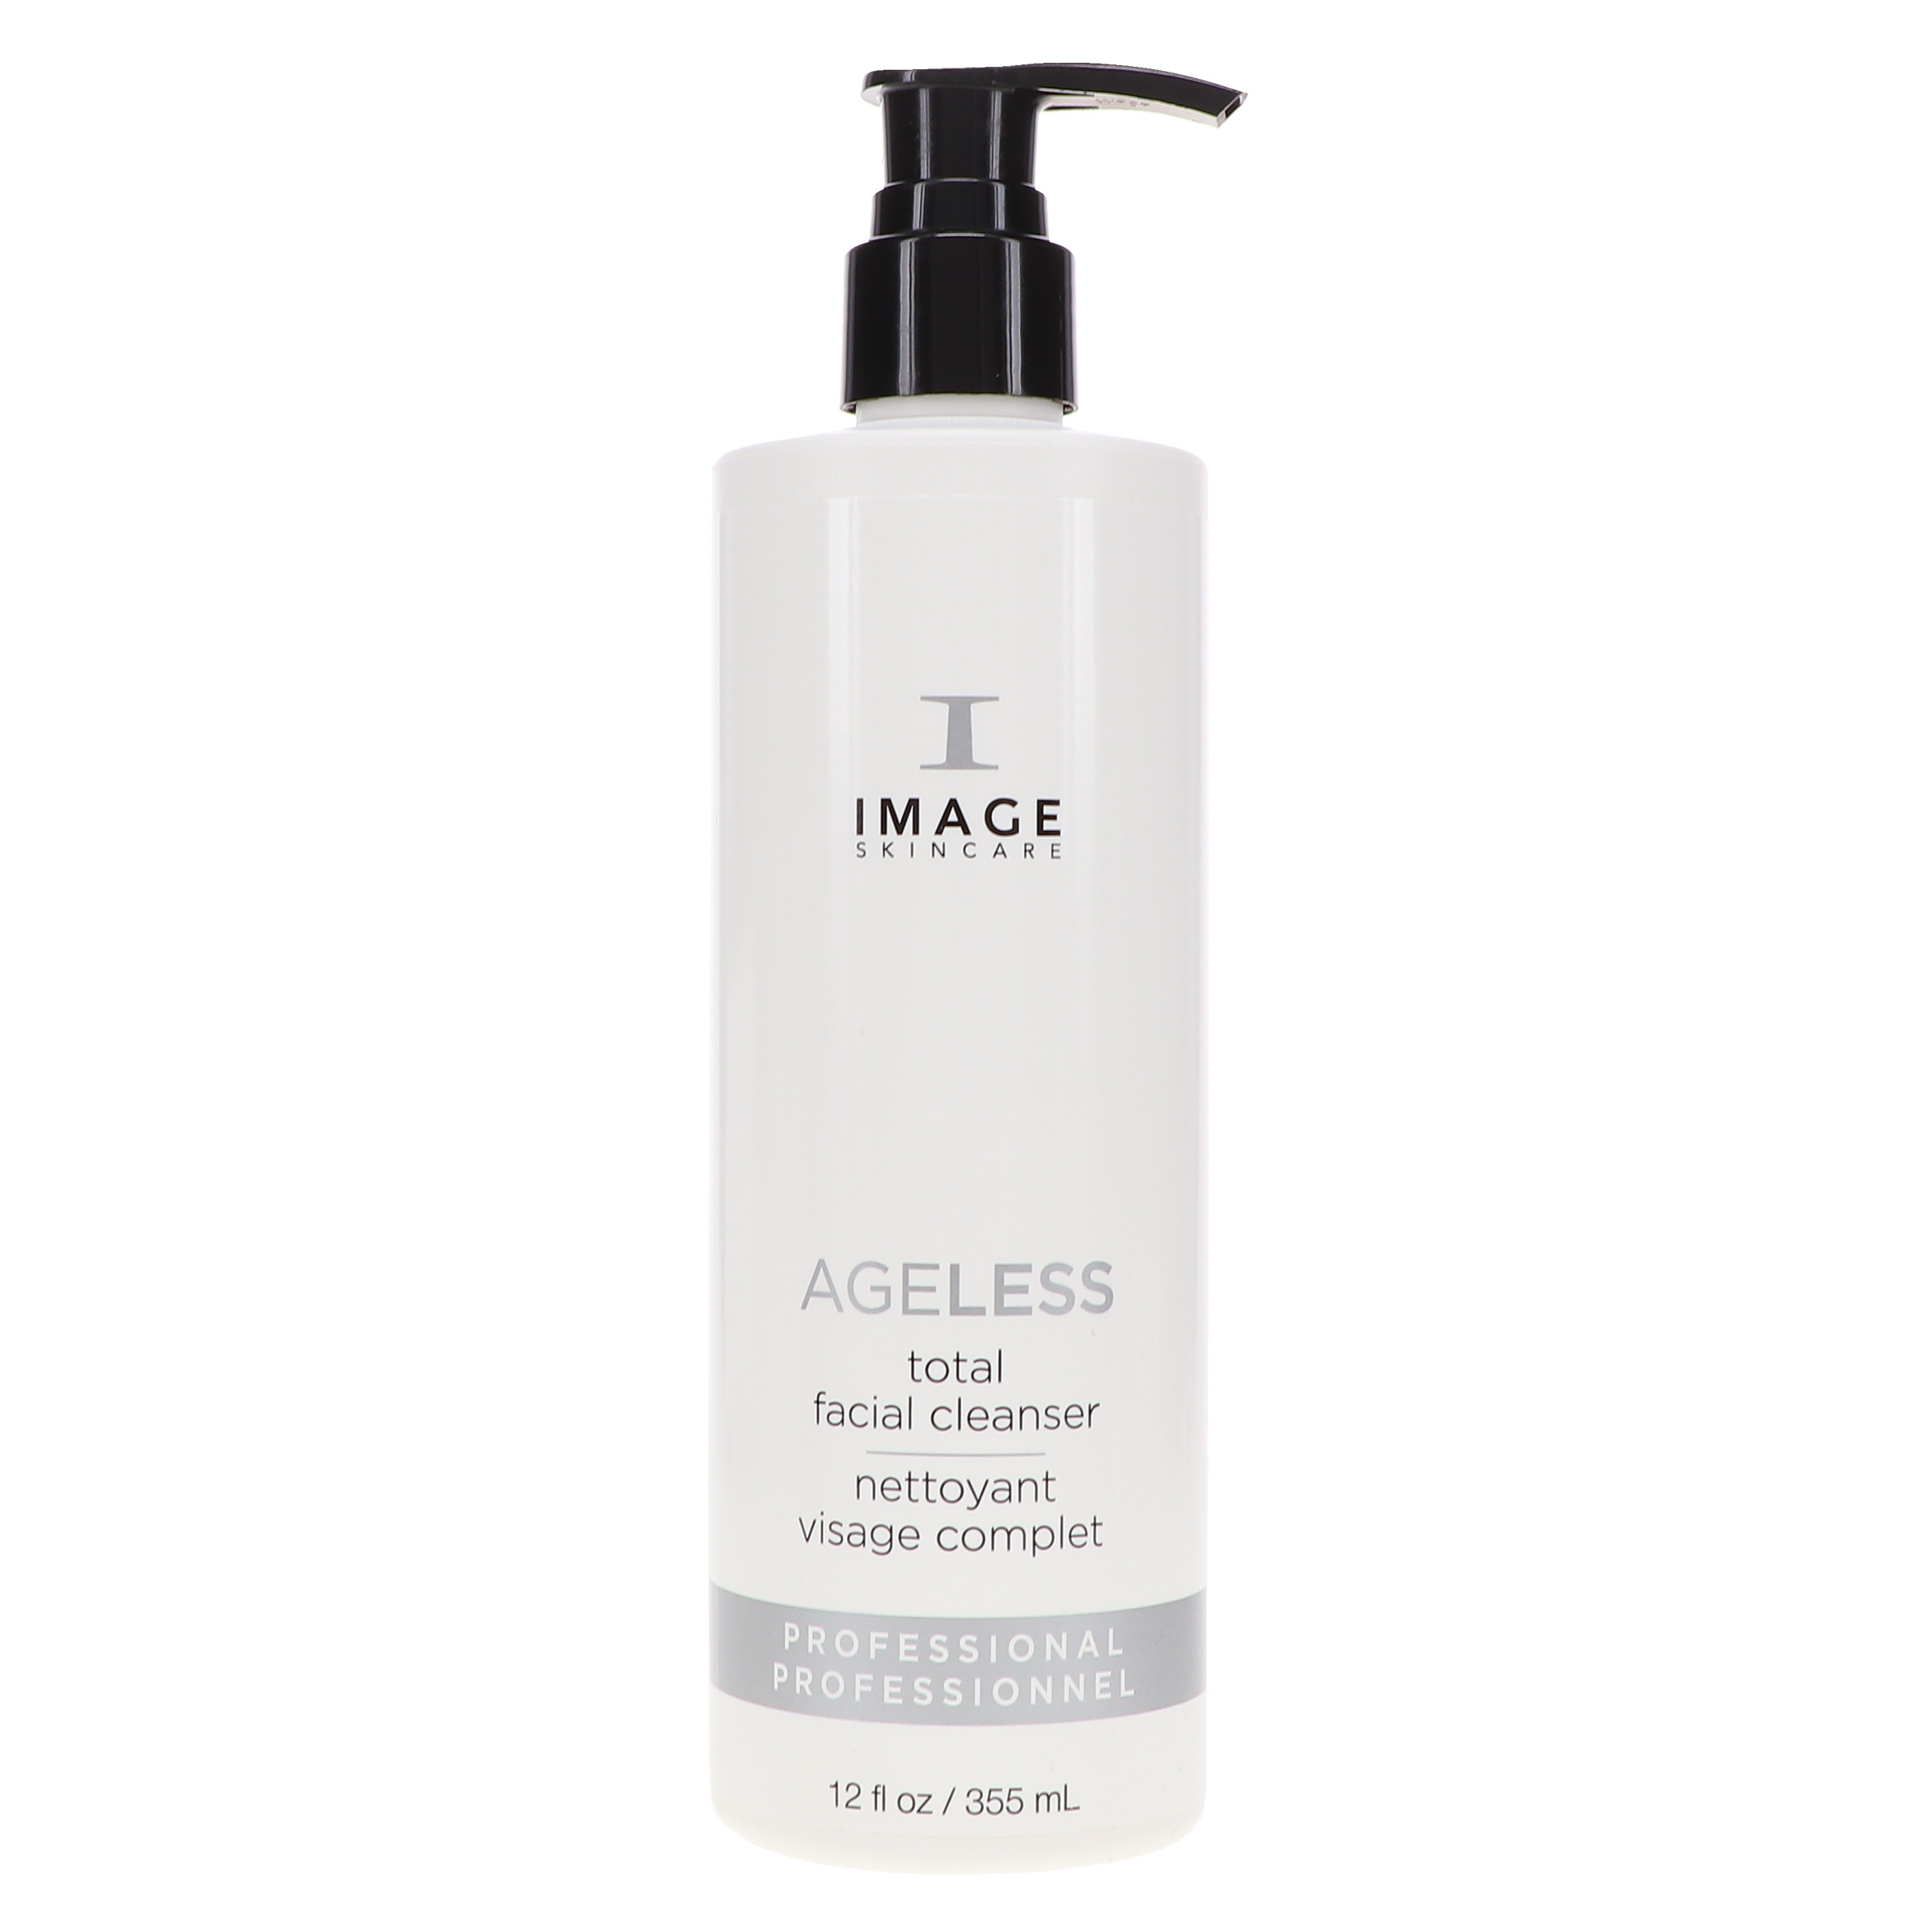 IMAGE Skincare Ageless Total Facial Cleanser 12 oz - image 1 of 9